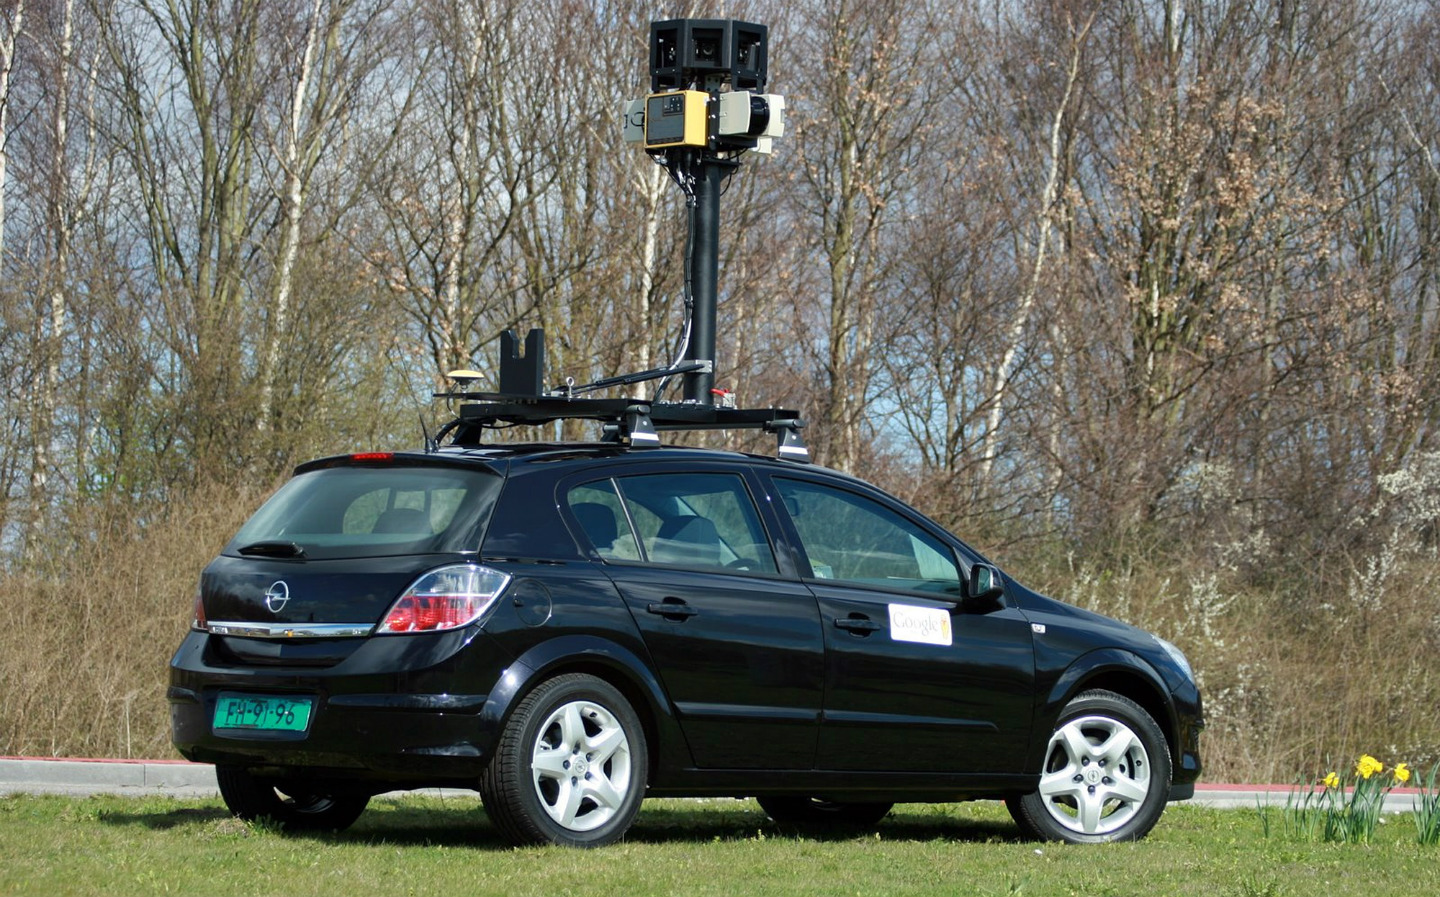 Google Street View cars measure and map air pollution